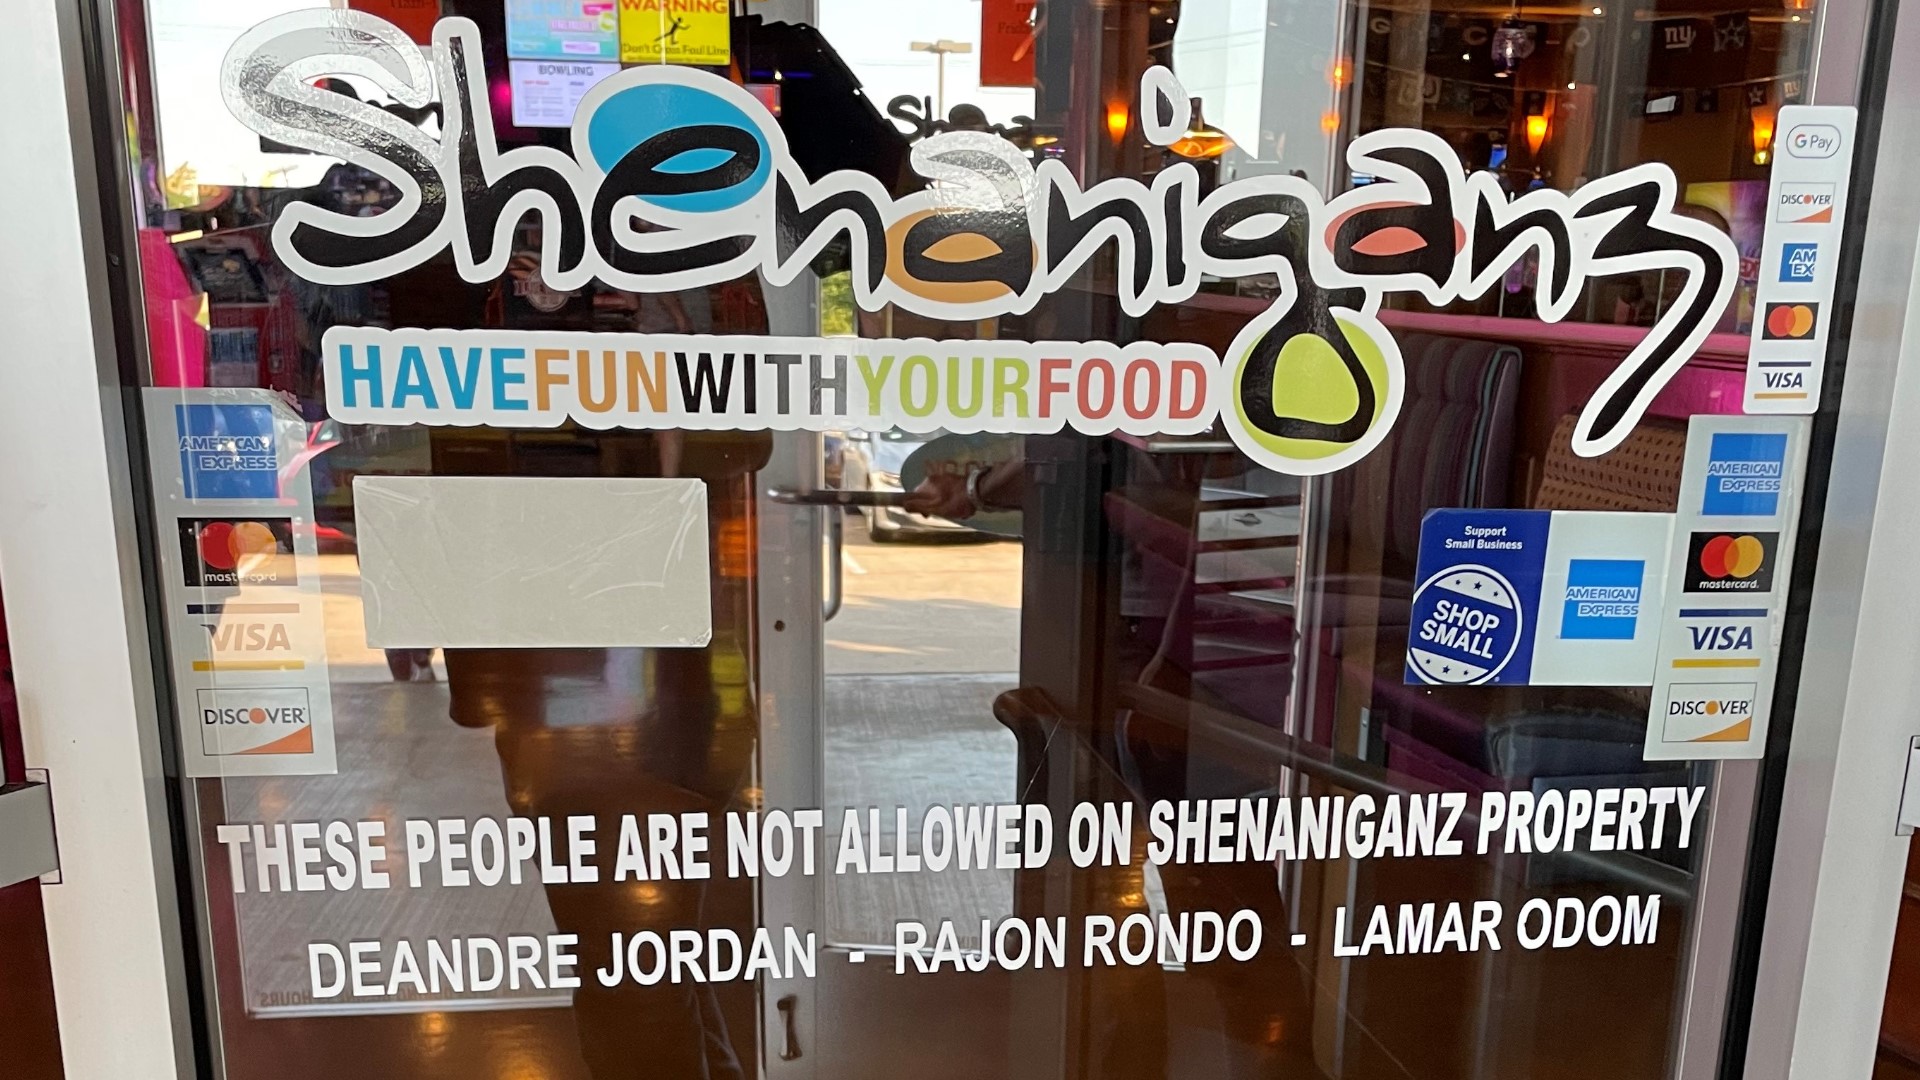 The entertainment spot in Rockwall went viral over the weekend after someone noticed that Deandre Jordan, Rajon Rondo, and Lamar Odom were banned from the premises.